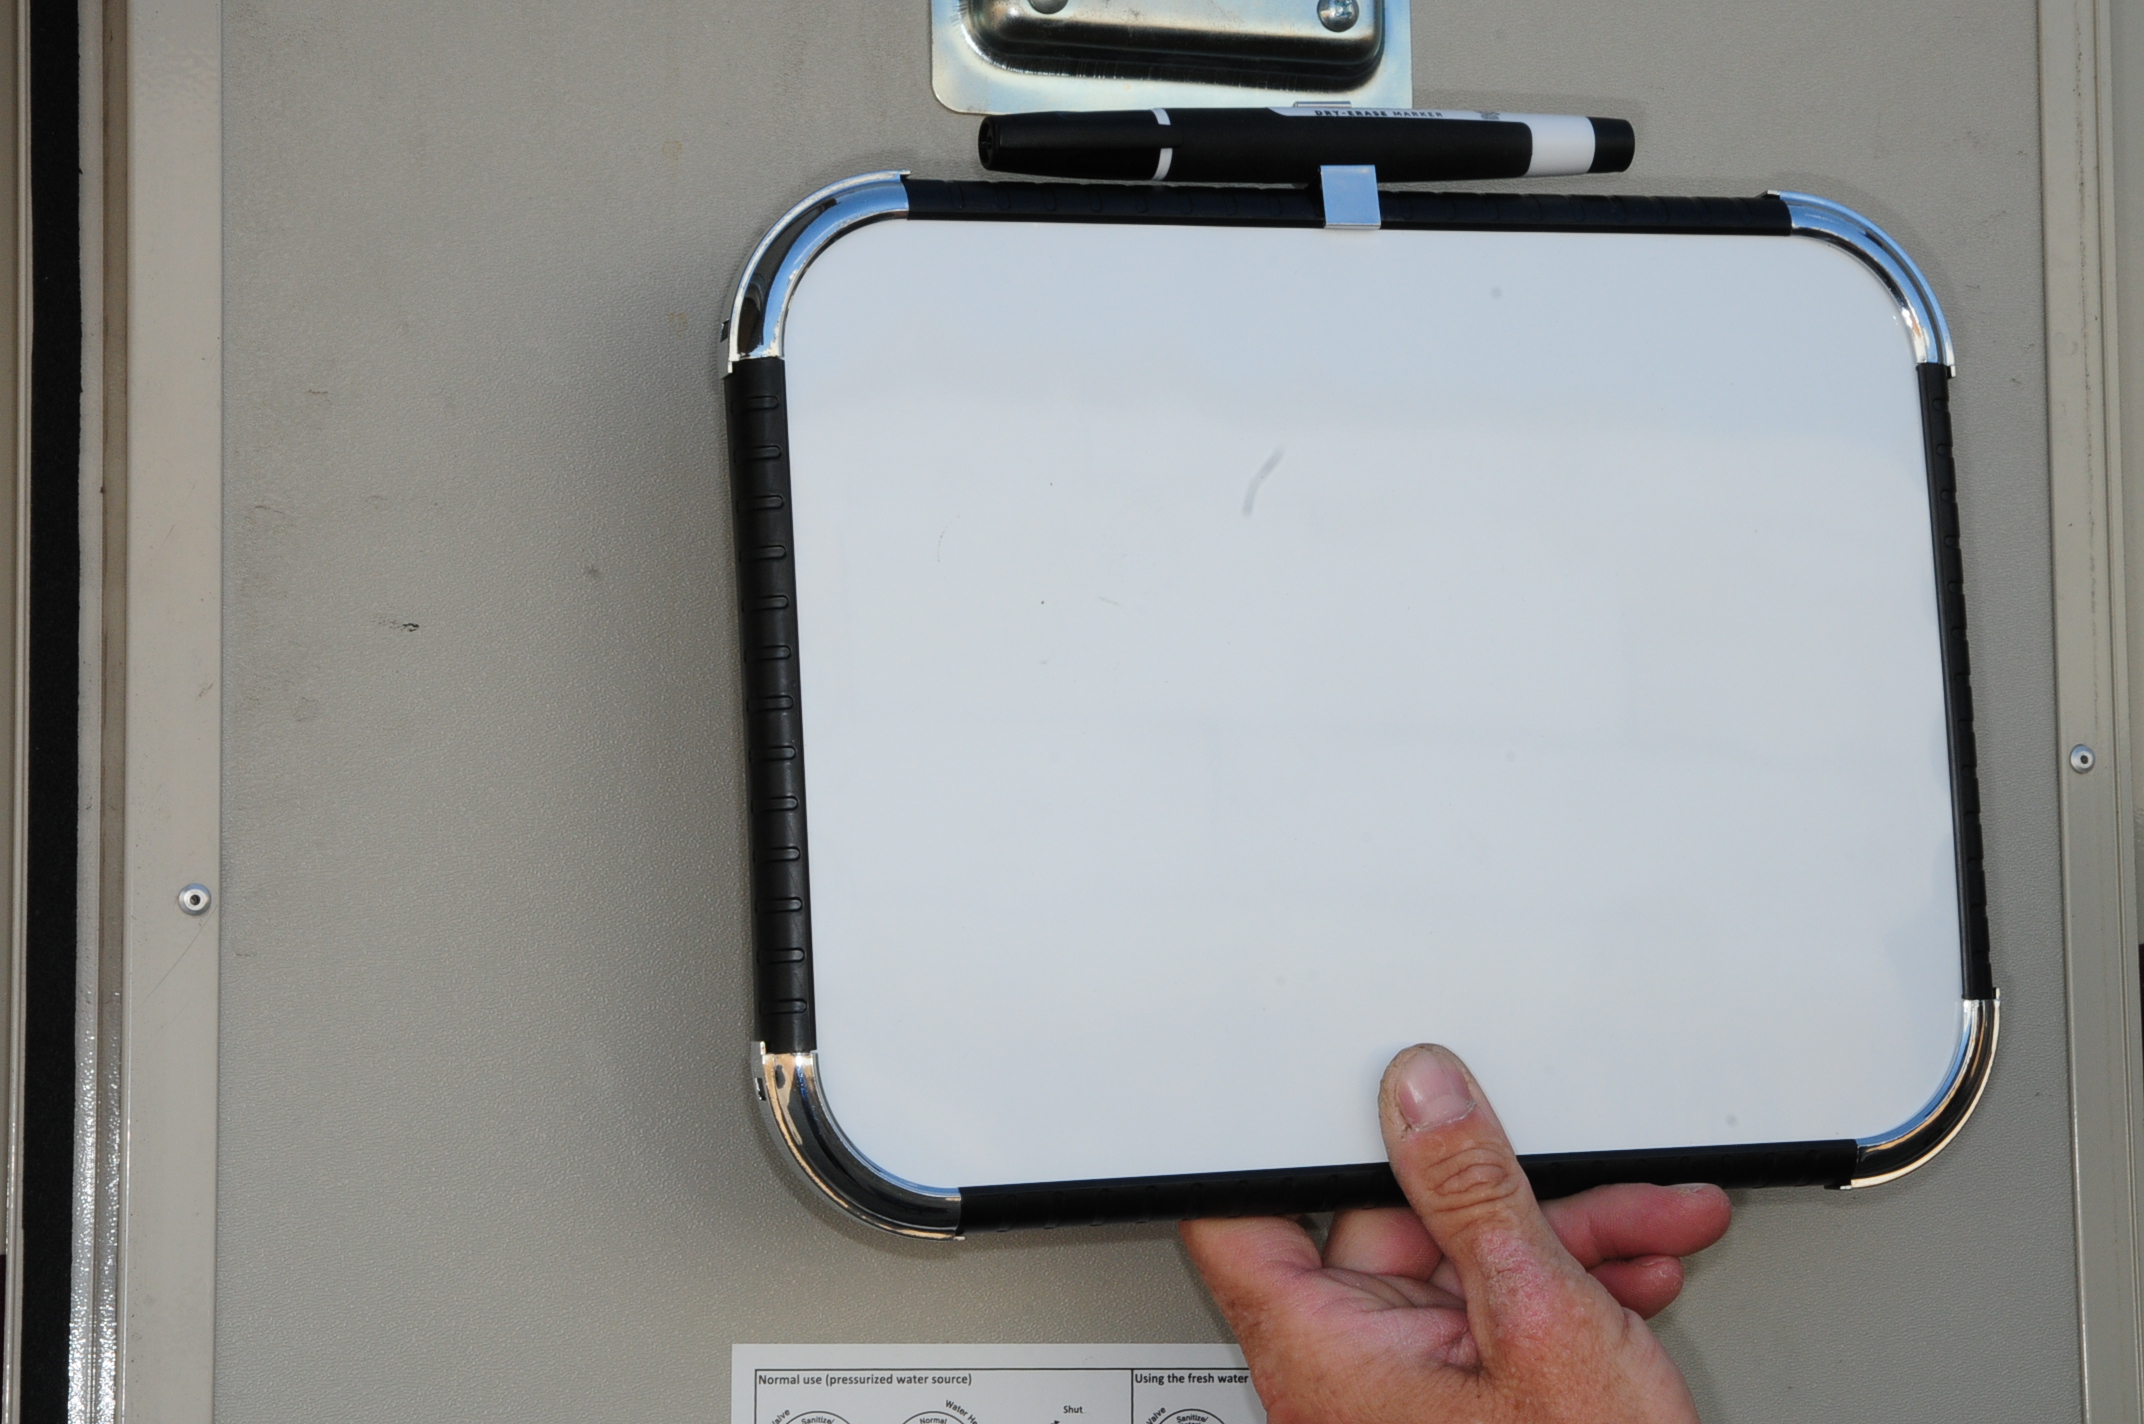 technician holds a 8 ½ x 11 inch white board from Office Depot